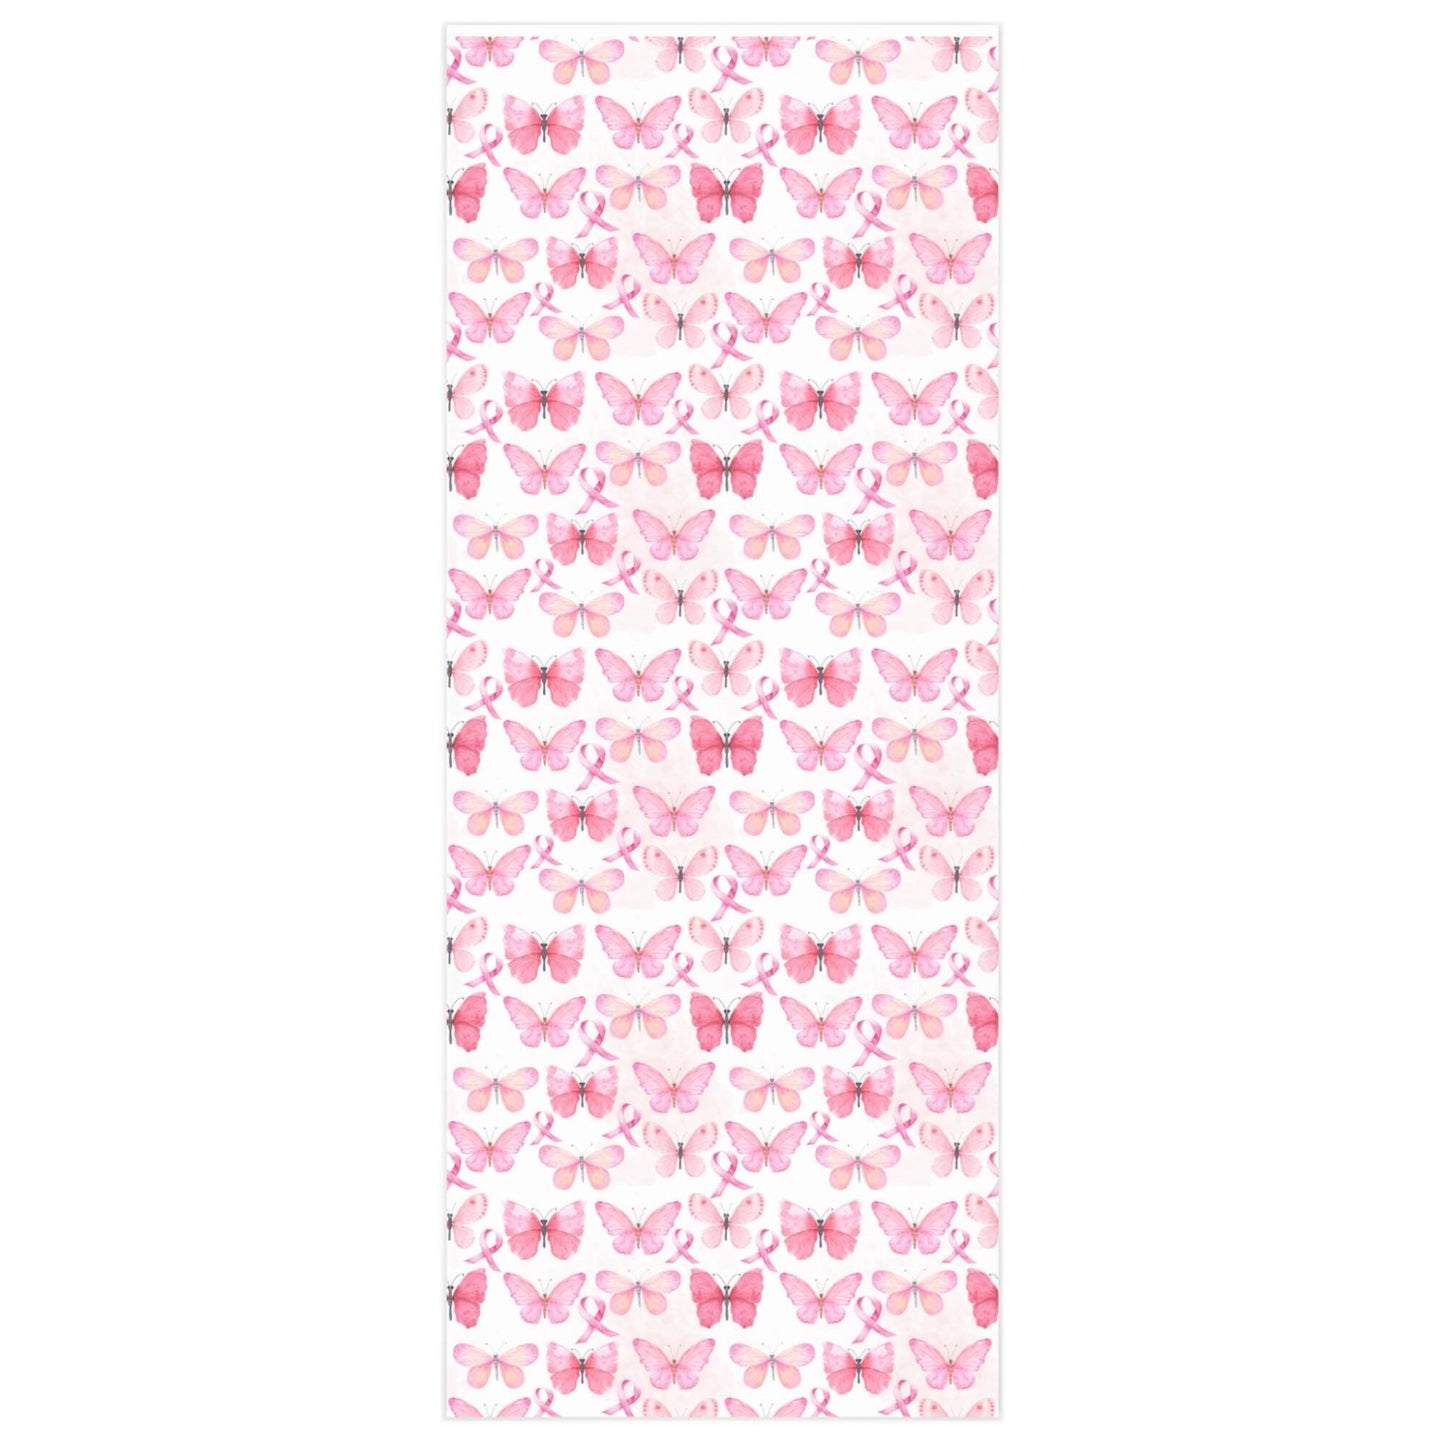 Pink Butterfly Breast Cancer Ribbon Gift Wrap Paper, Pink Wrapping Paper, Cancer Awareness Love Gift, Breast Cancer Gifts, Cancer Survivor